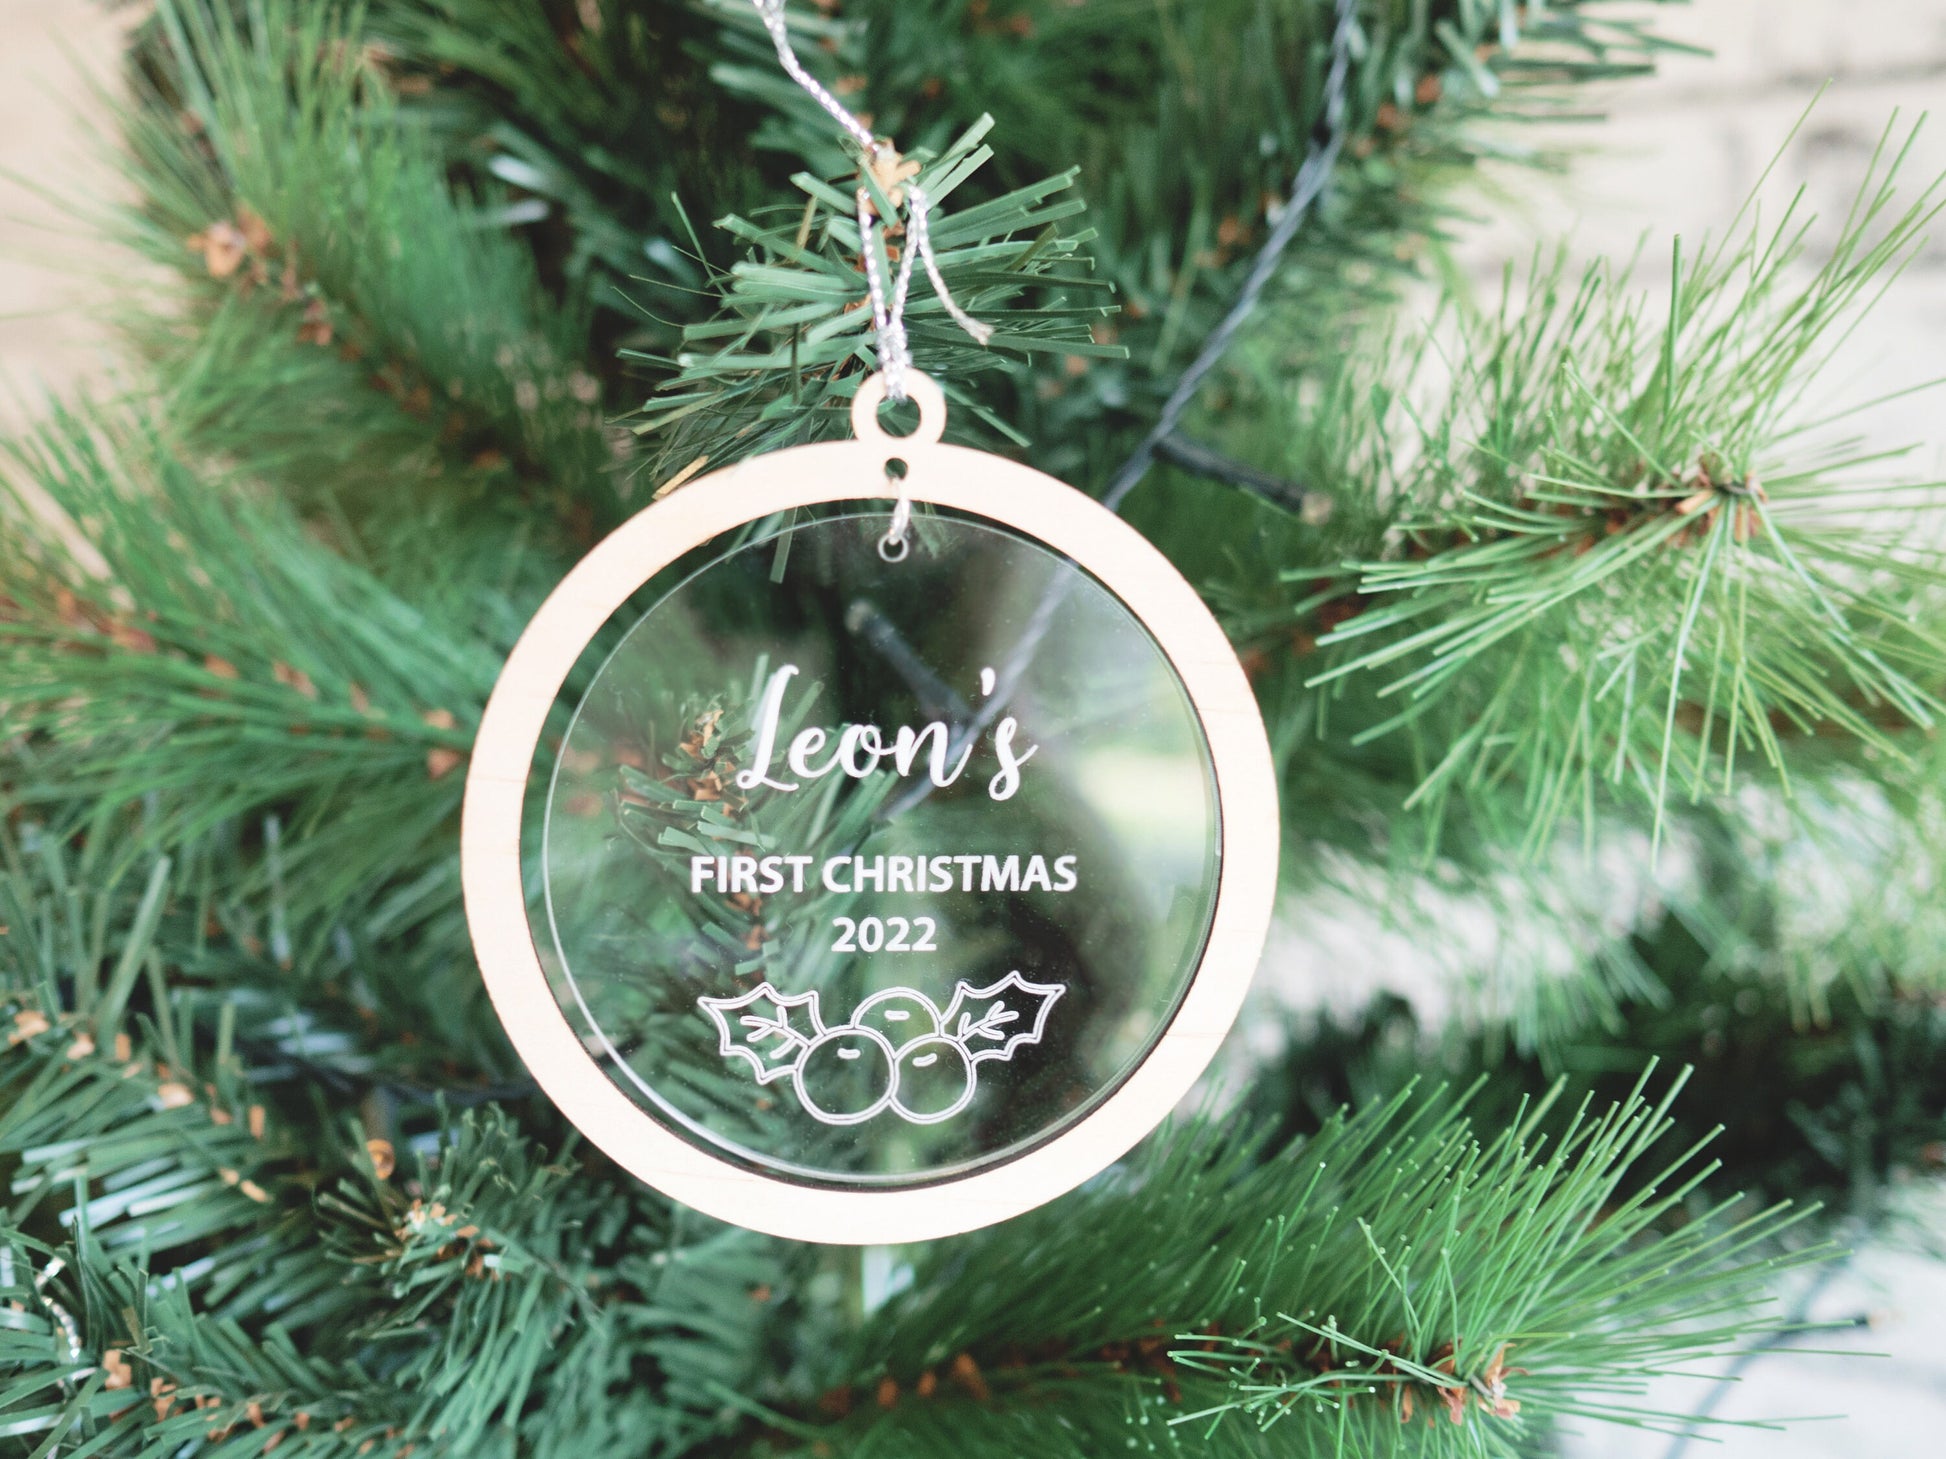 Baby first Christmas - Baby ornament, New baby Ornament, First Christmas, Christmas Ornament, Christmas Tree Decor, 1st Christmas